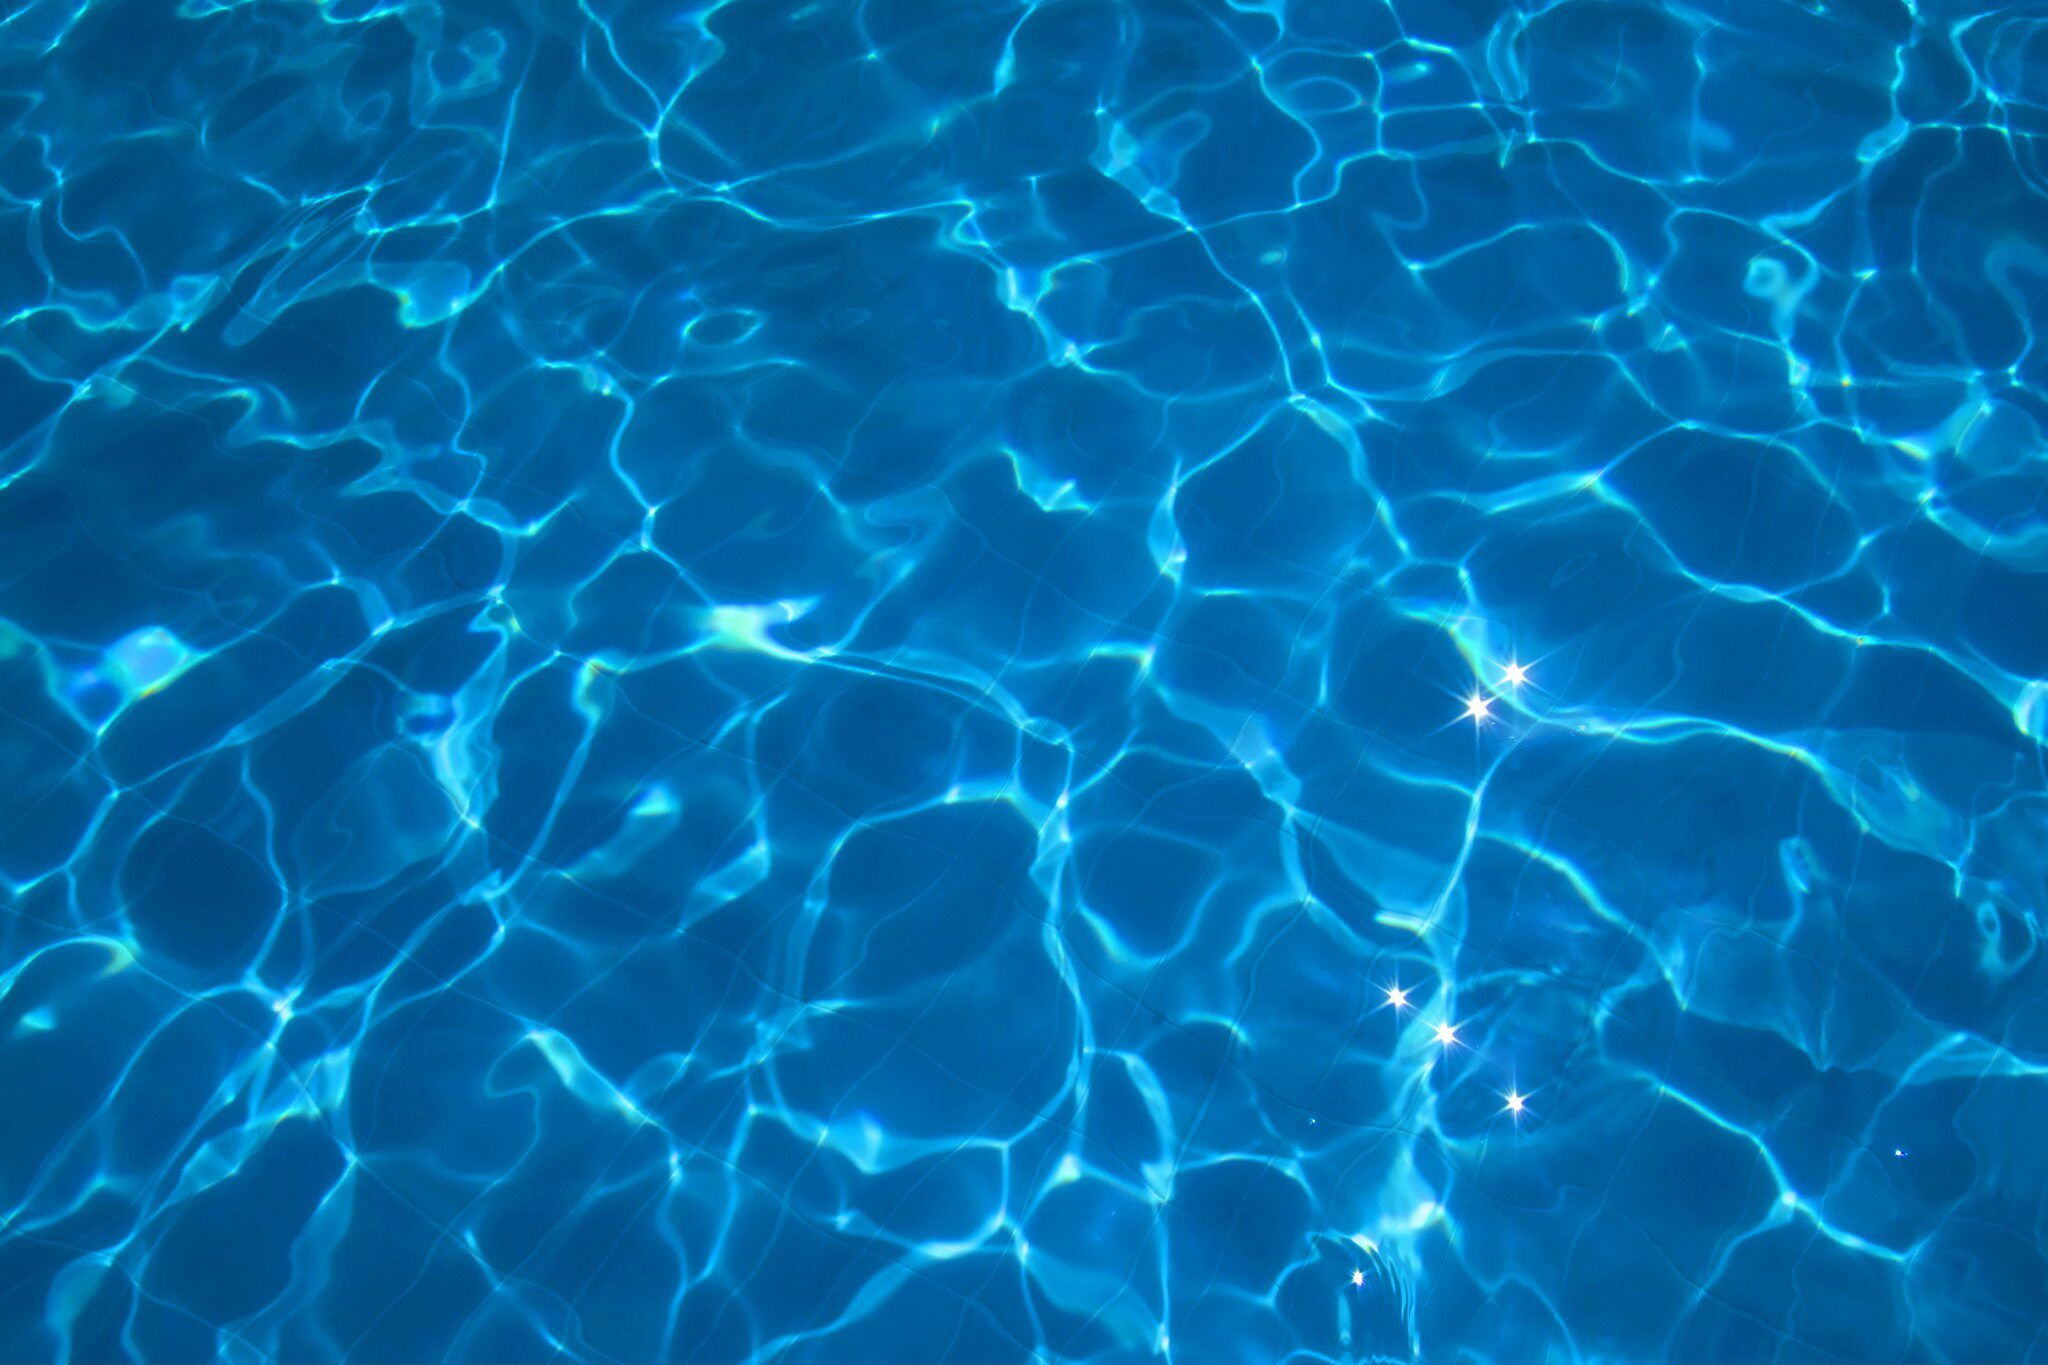 Safeguard Your Summer Fun with These Essential Pool Safety Tips